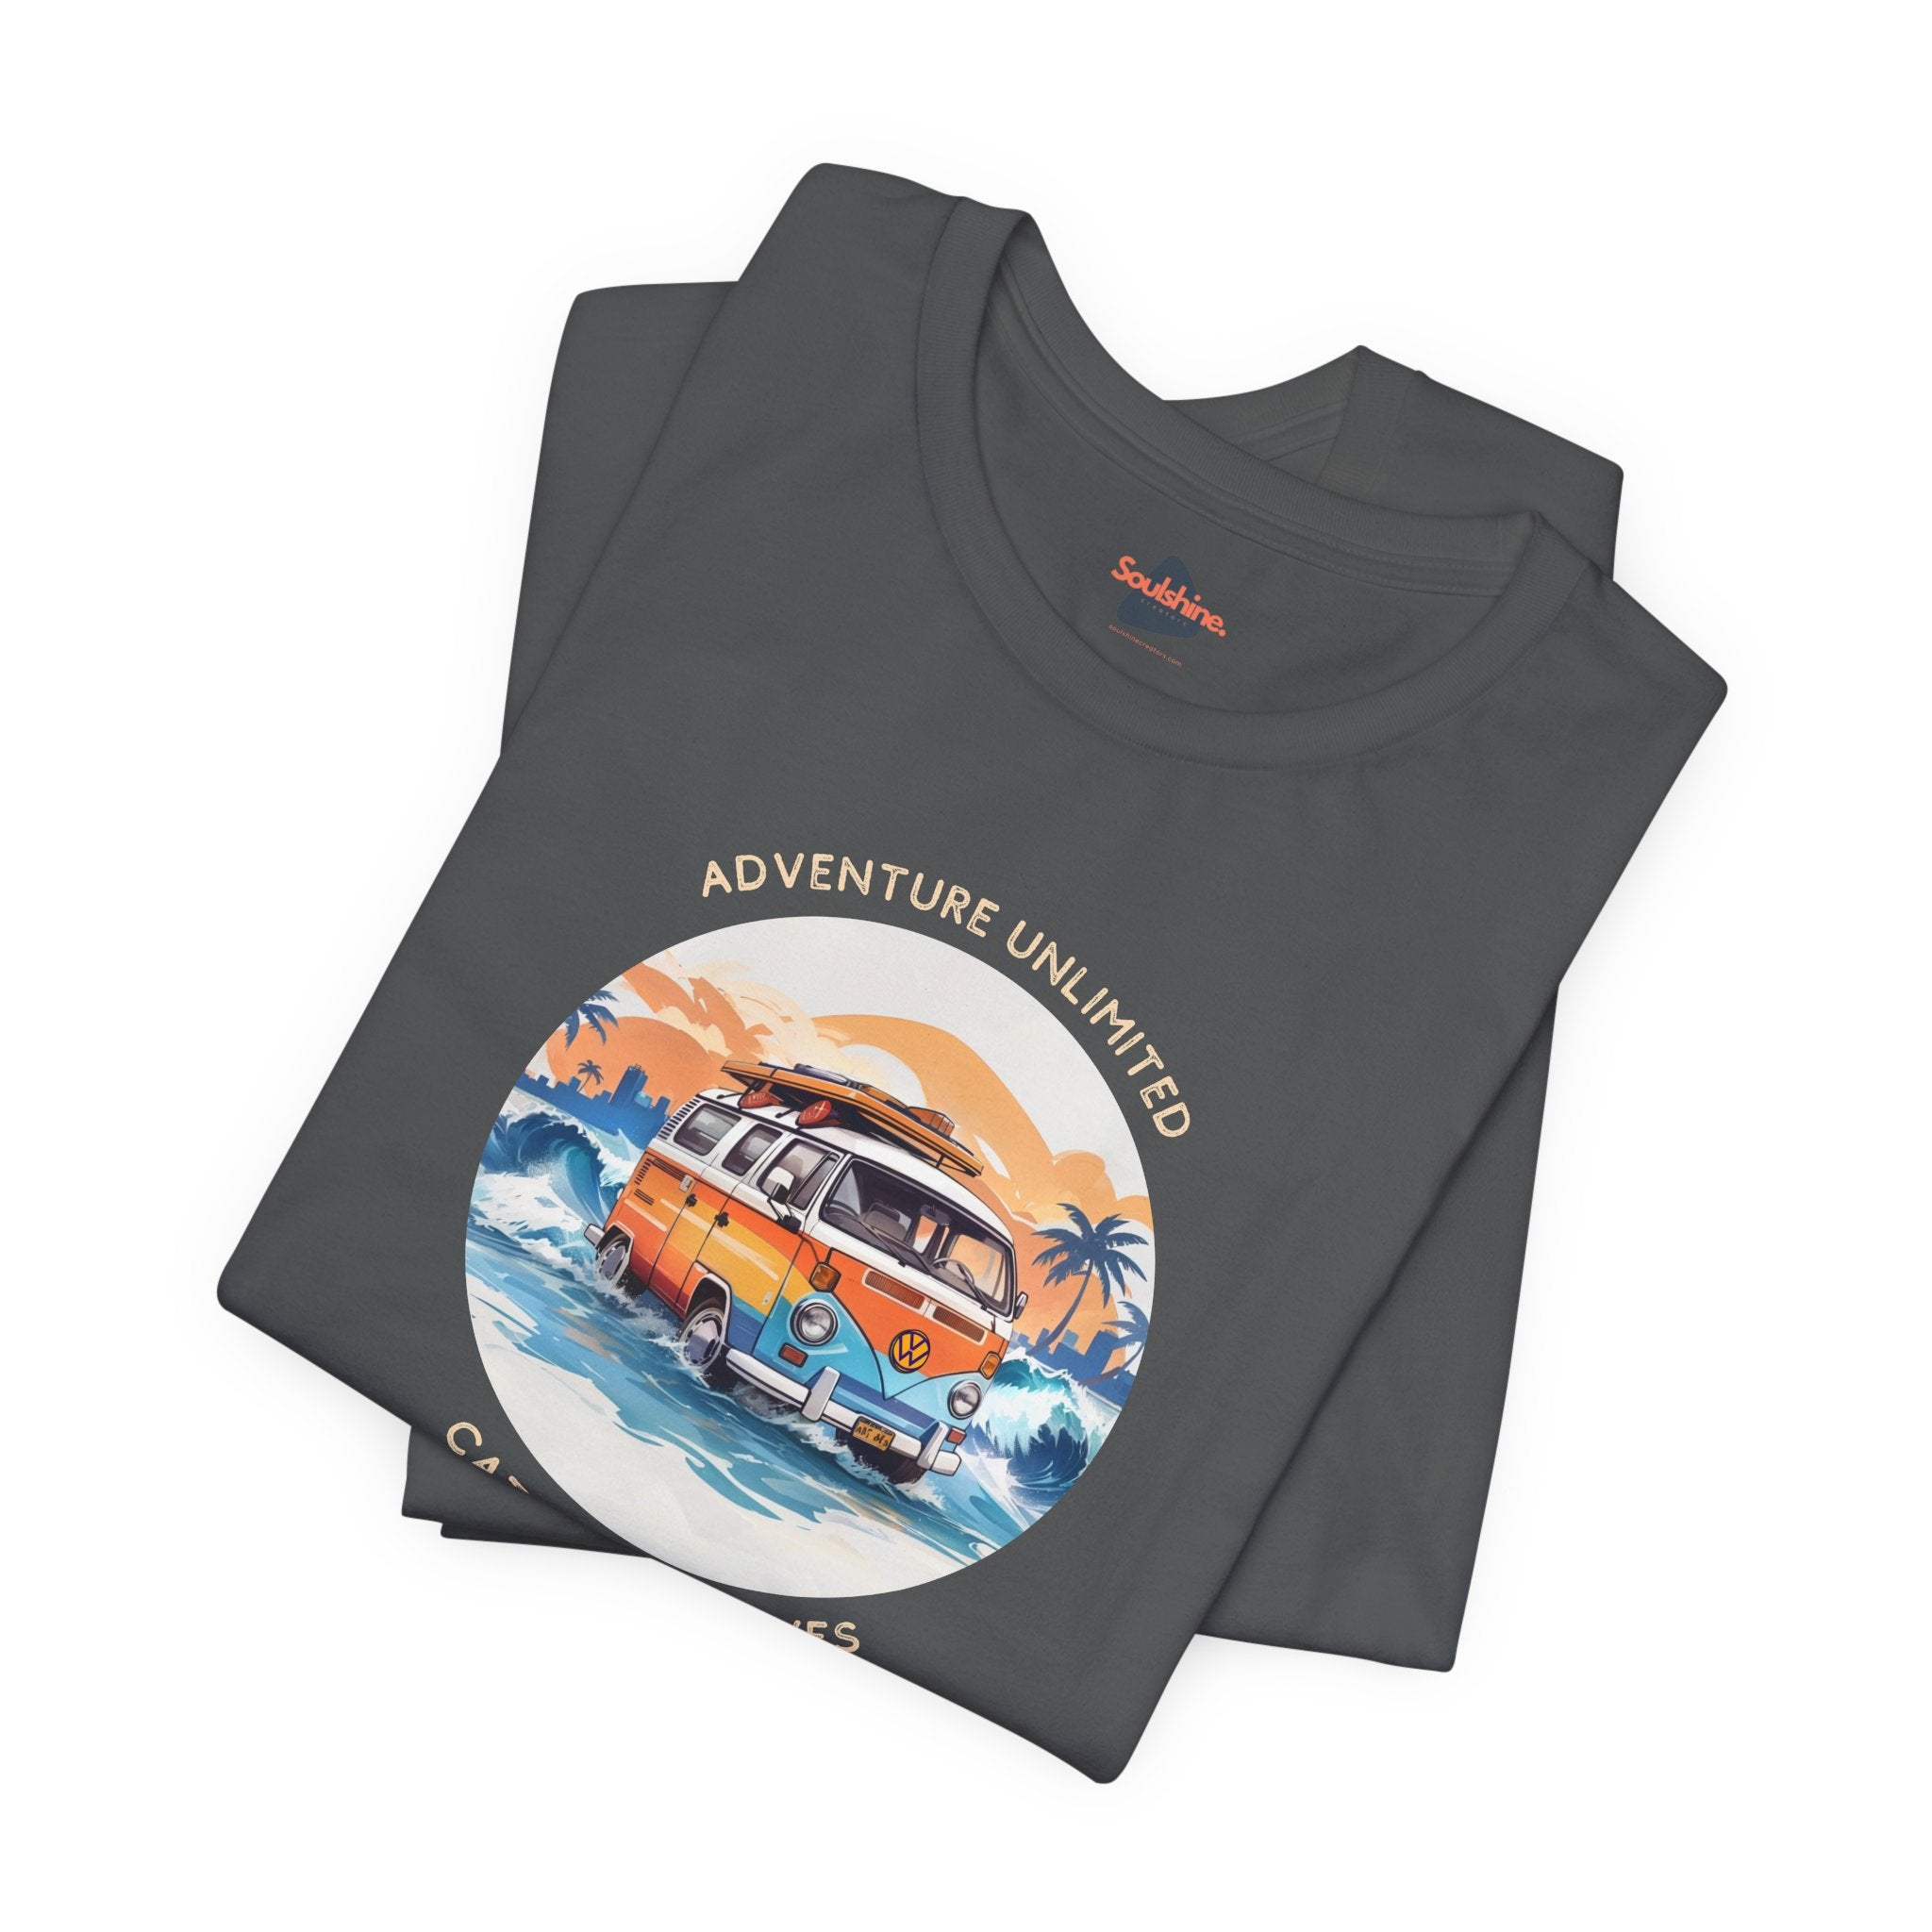 Adventure Unlimited Unisex Jersey Short Sleeve Tee with Direct-to-Garment Printed Van and Surfboard Design